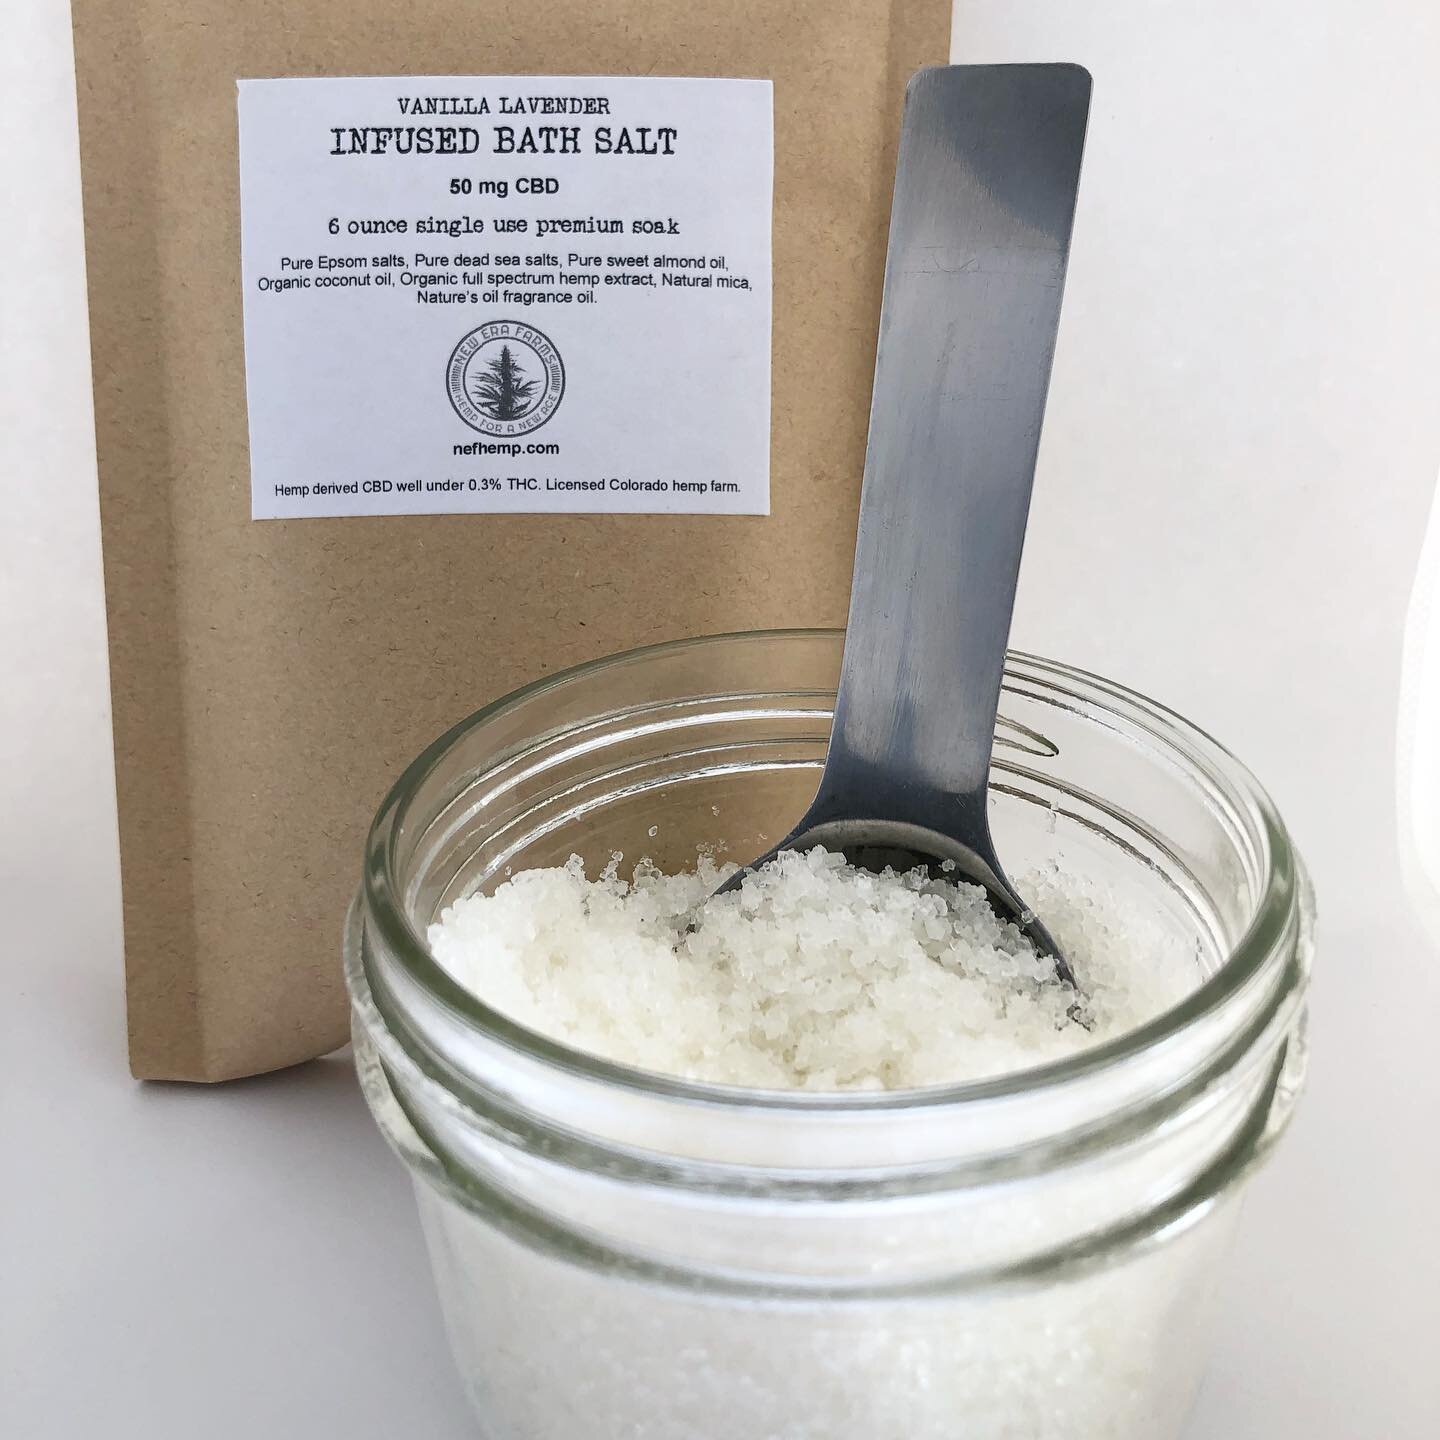 Infused Bath Salts. 

Soak in the calming effects of premium salts &amp; CBD for a truly relaxing self care experience. 

Marked down ON SALE this week only. Just in time for Valentine&rsquo;s Day. 

Available in 3 scents:
Vanilla Lavender, Coconut m